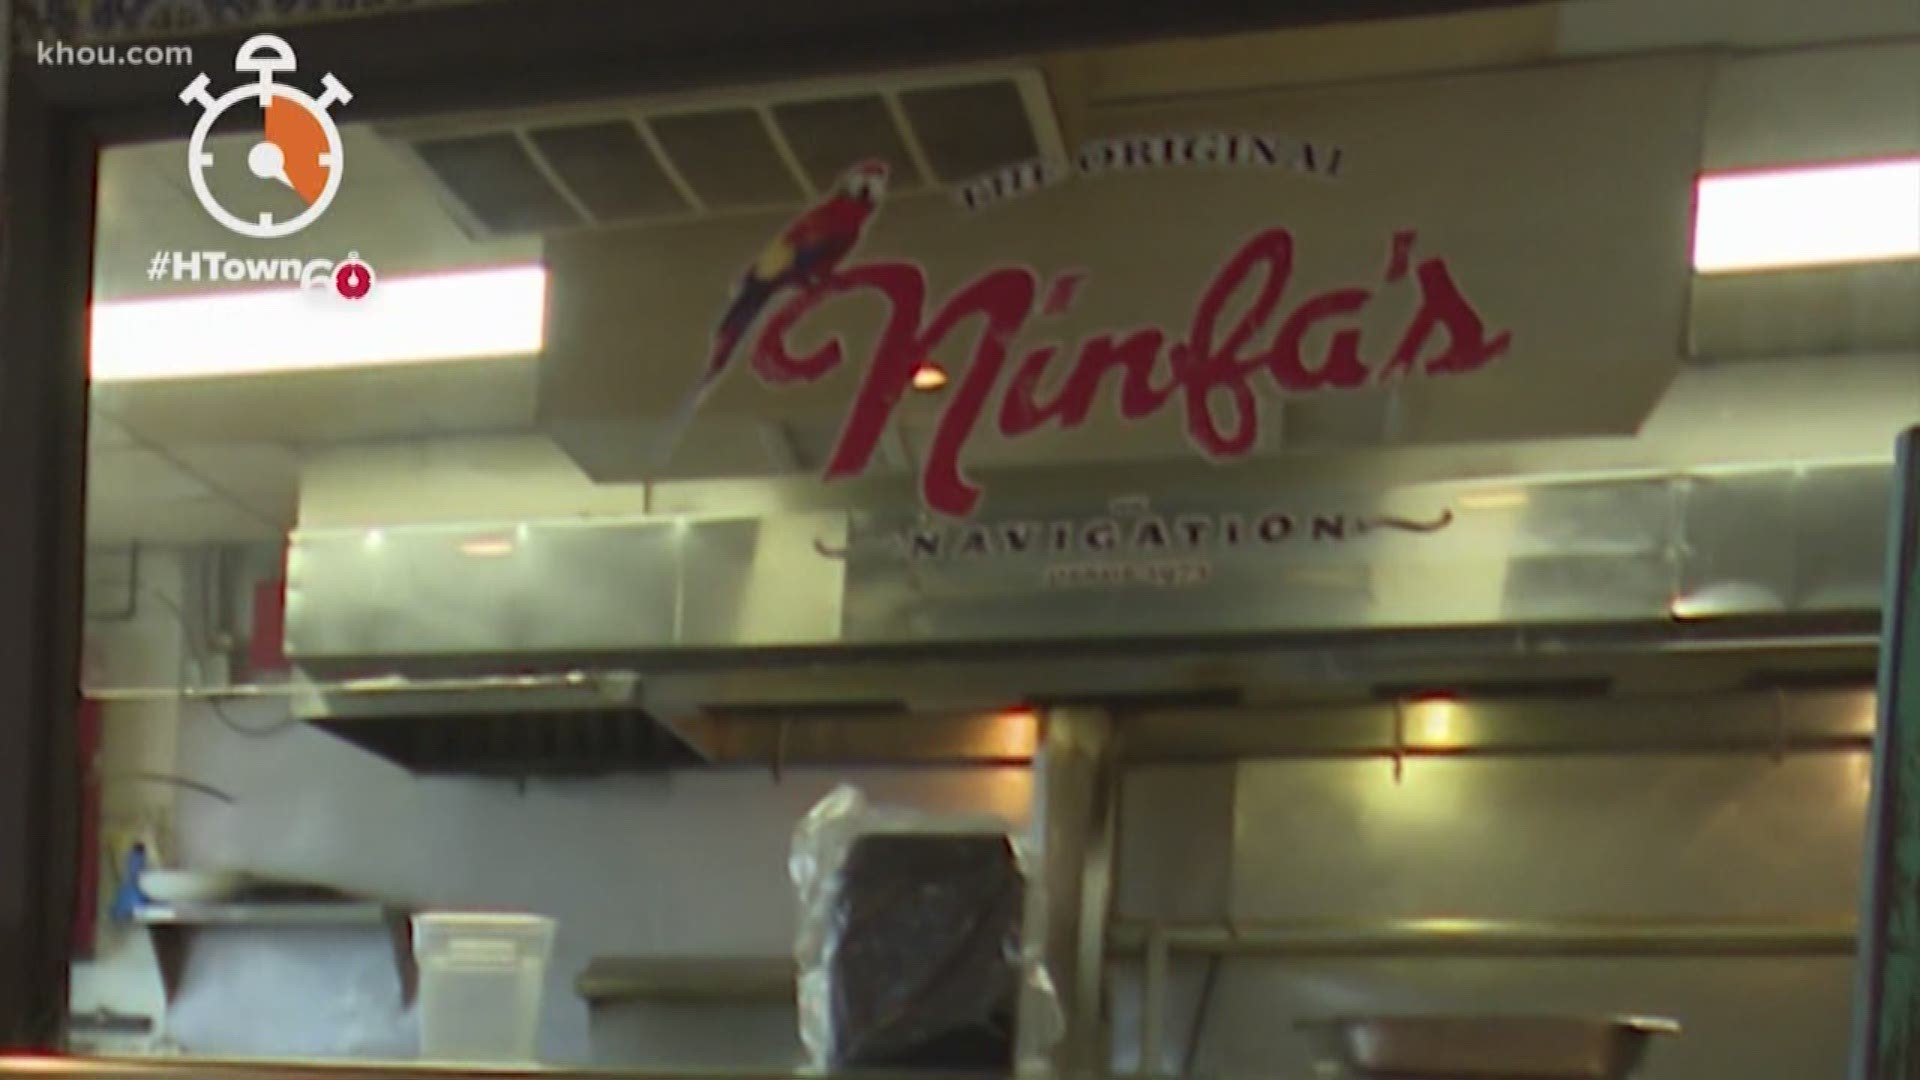 The original Ninfa’s on Navigation is a Houston favorite. We know former President Bush and Barbara loved to stop by for a meal. And now the restaurant is getting big recognition. Brandi Smith shows us in this morning's HTown60.